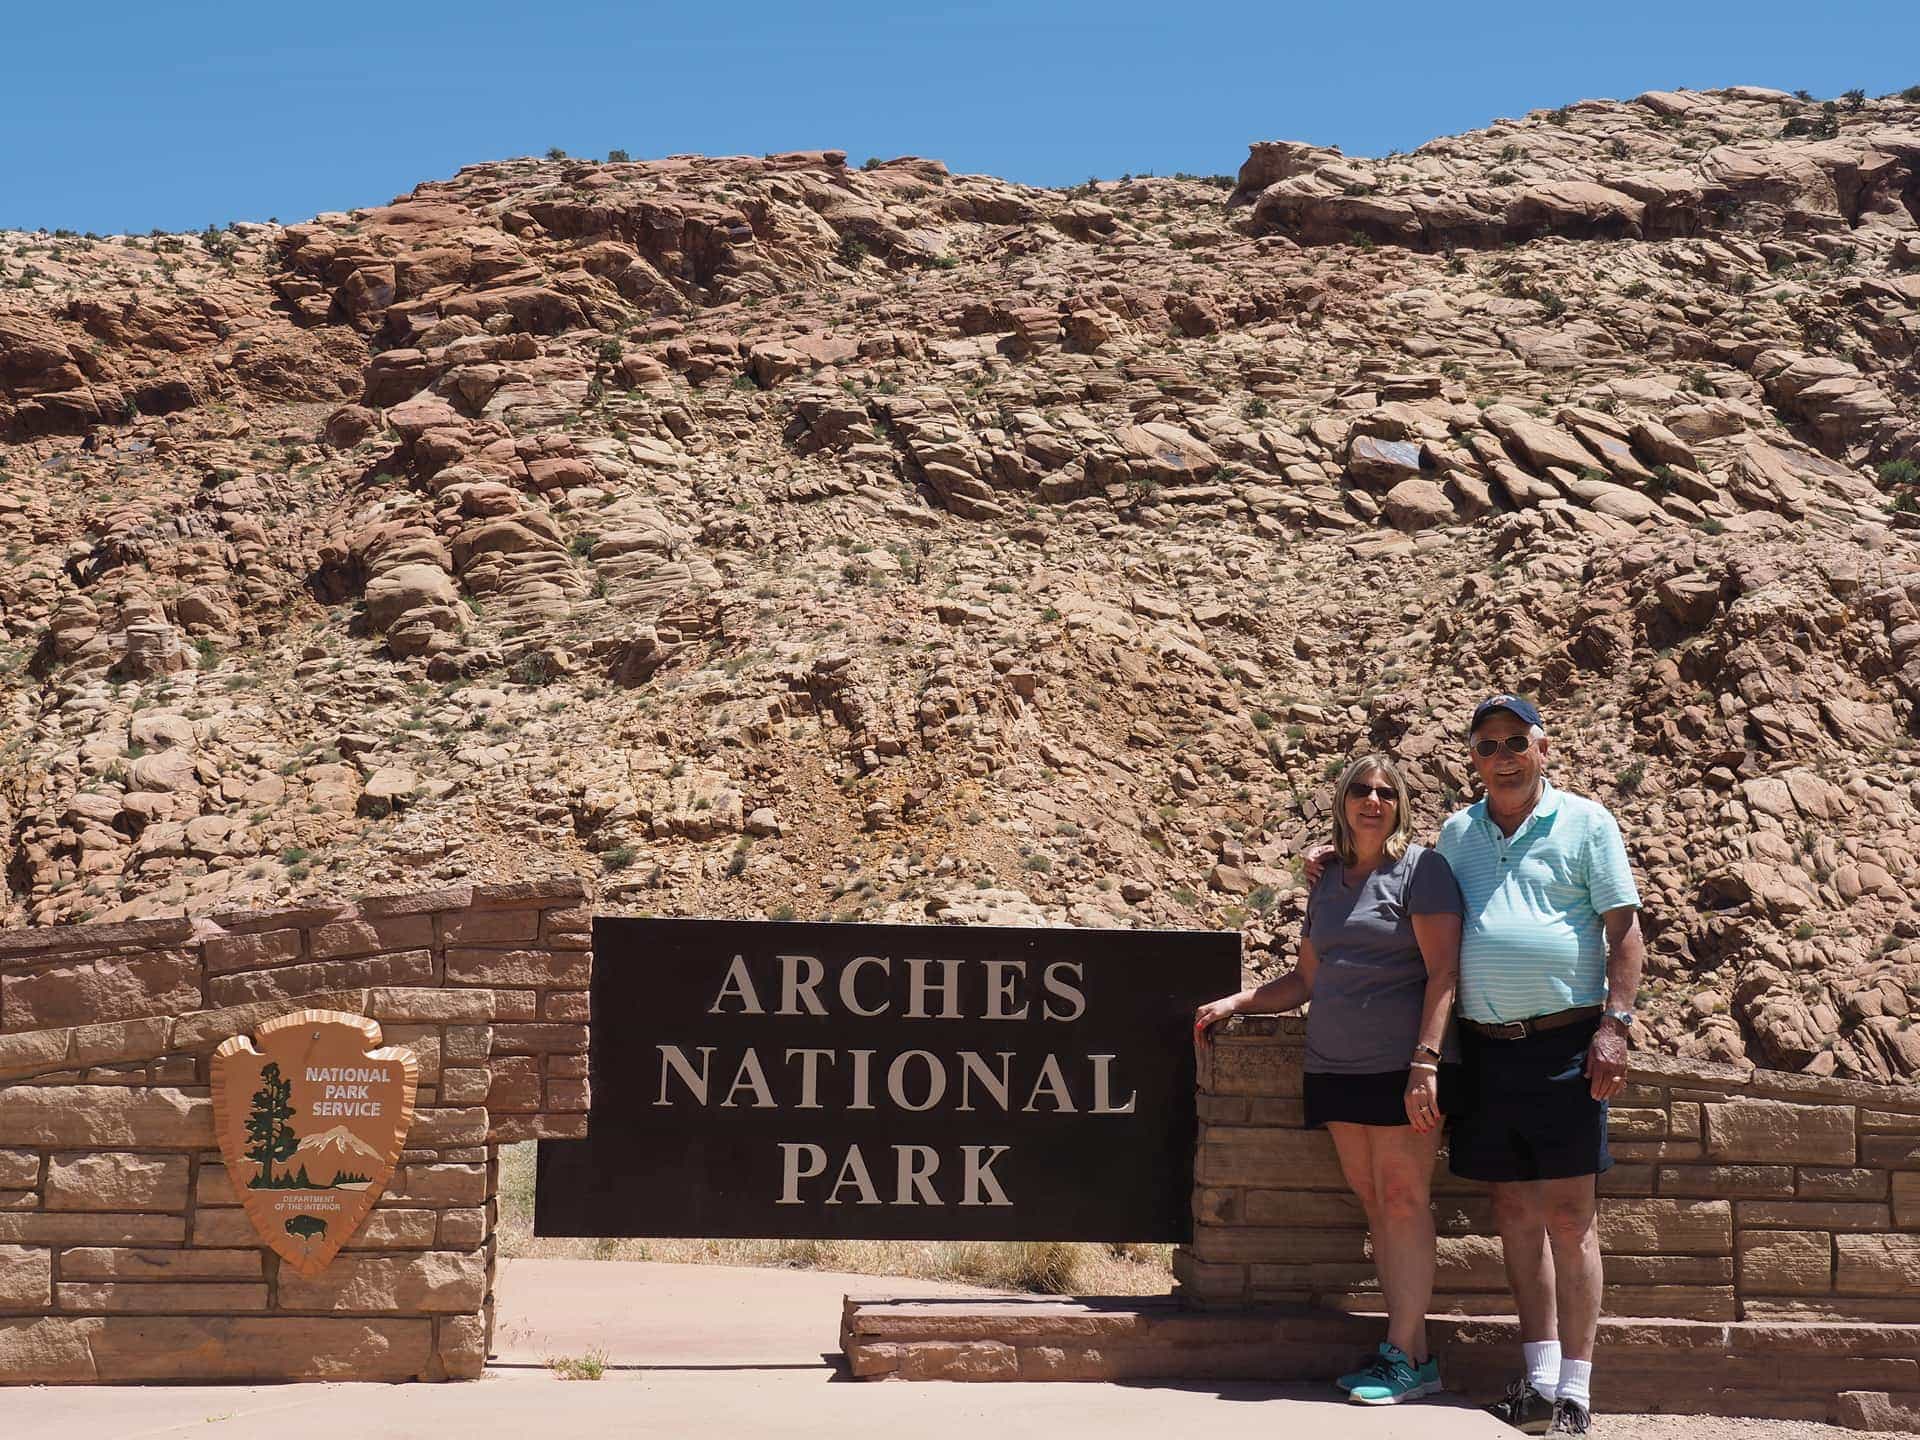 John and Marilyn at the entrance to Arches National Park